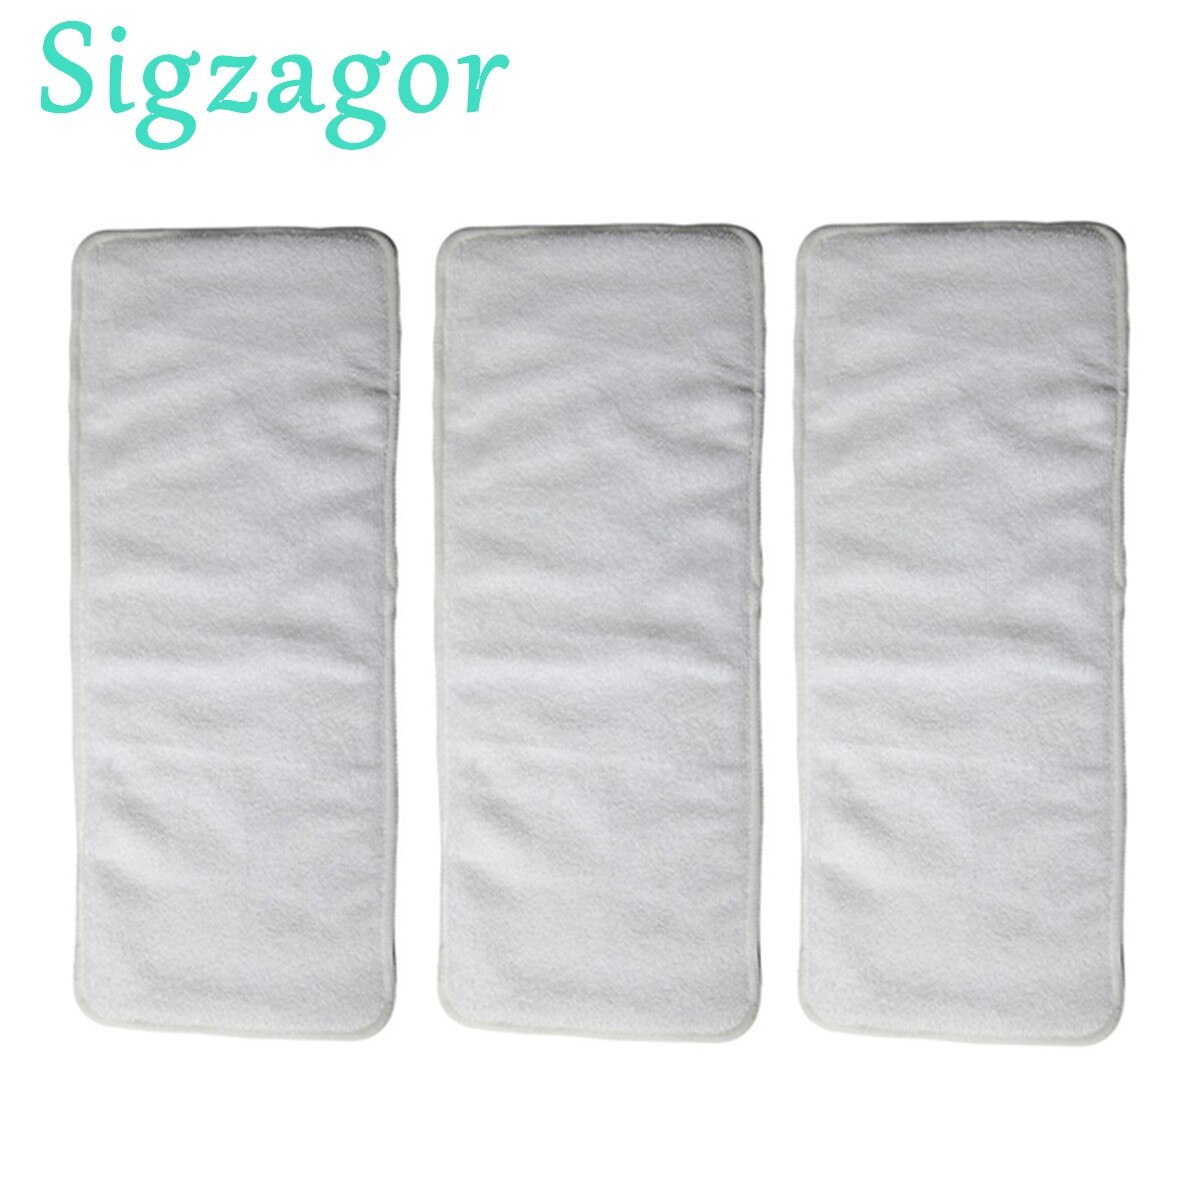 [Sigzagor] 3 Adult Diaper Inserts Incontinence Disable Washable Reusable Cloth Diaper Nappy Liner Big Microfiber,4 Layer 20x49cm